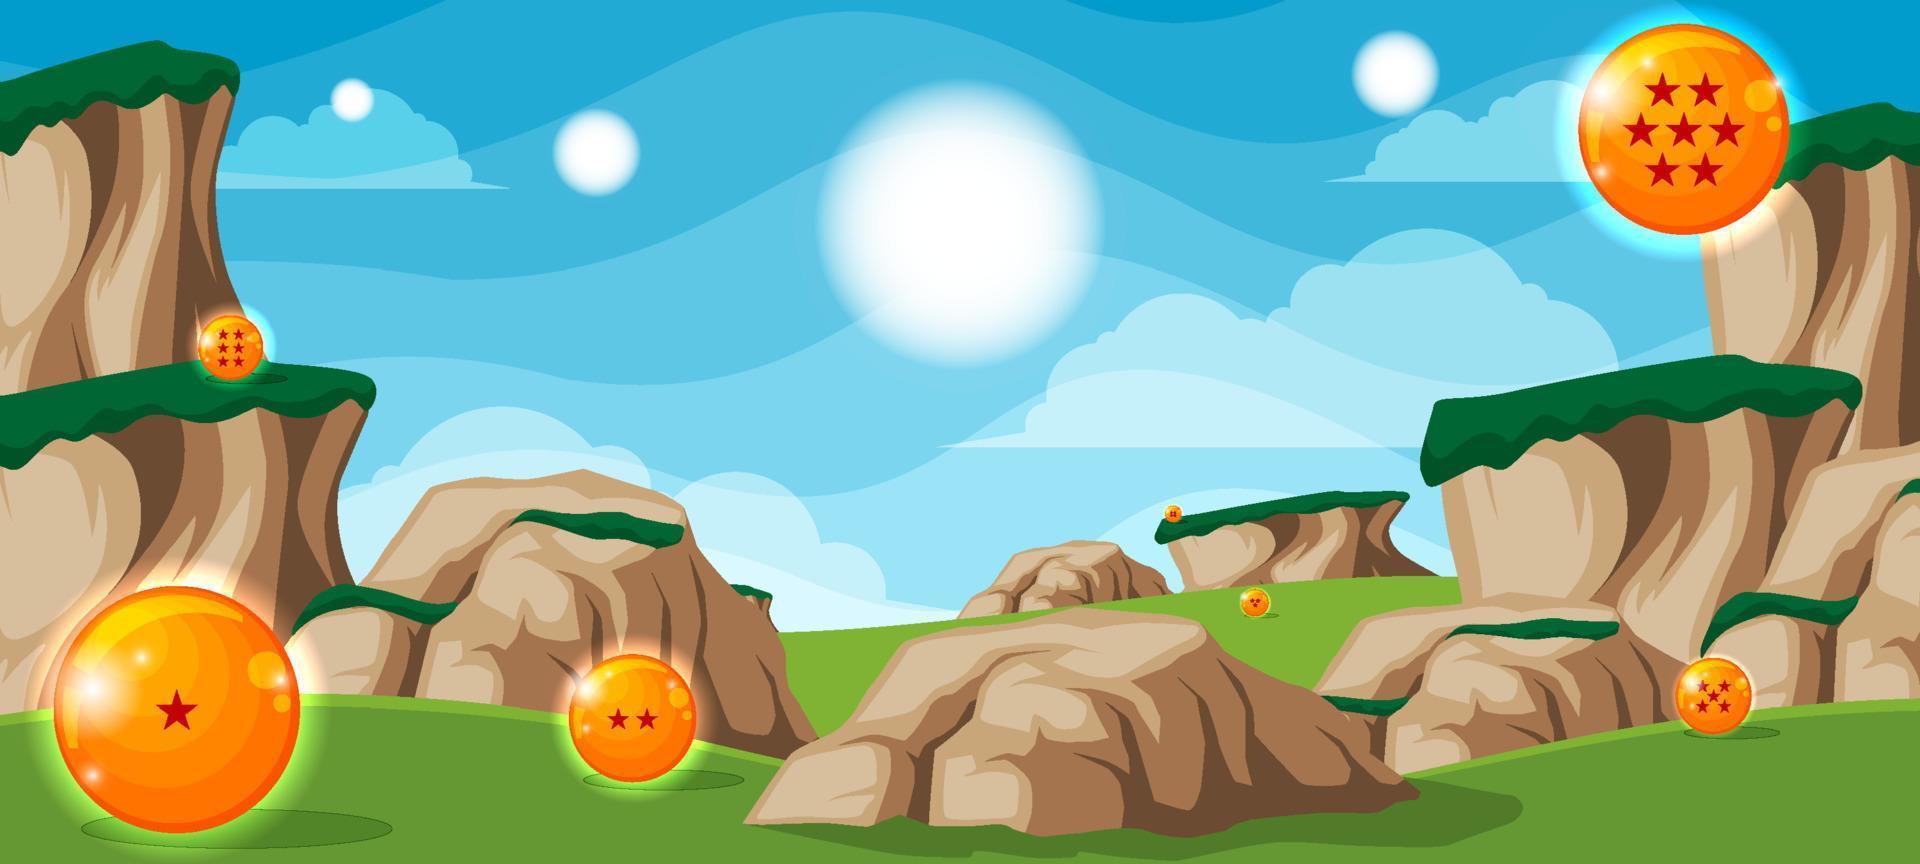 Background of Landscape Scenery vector